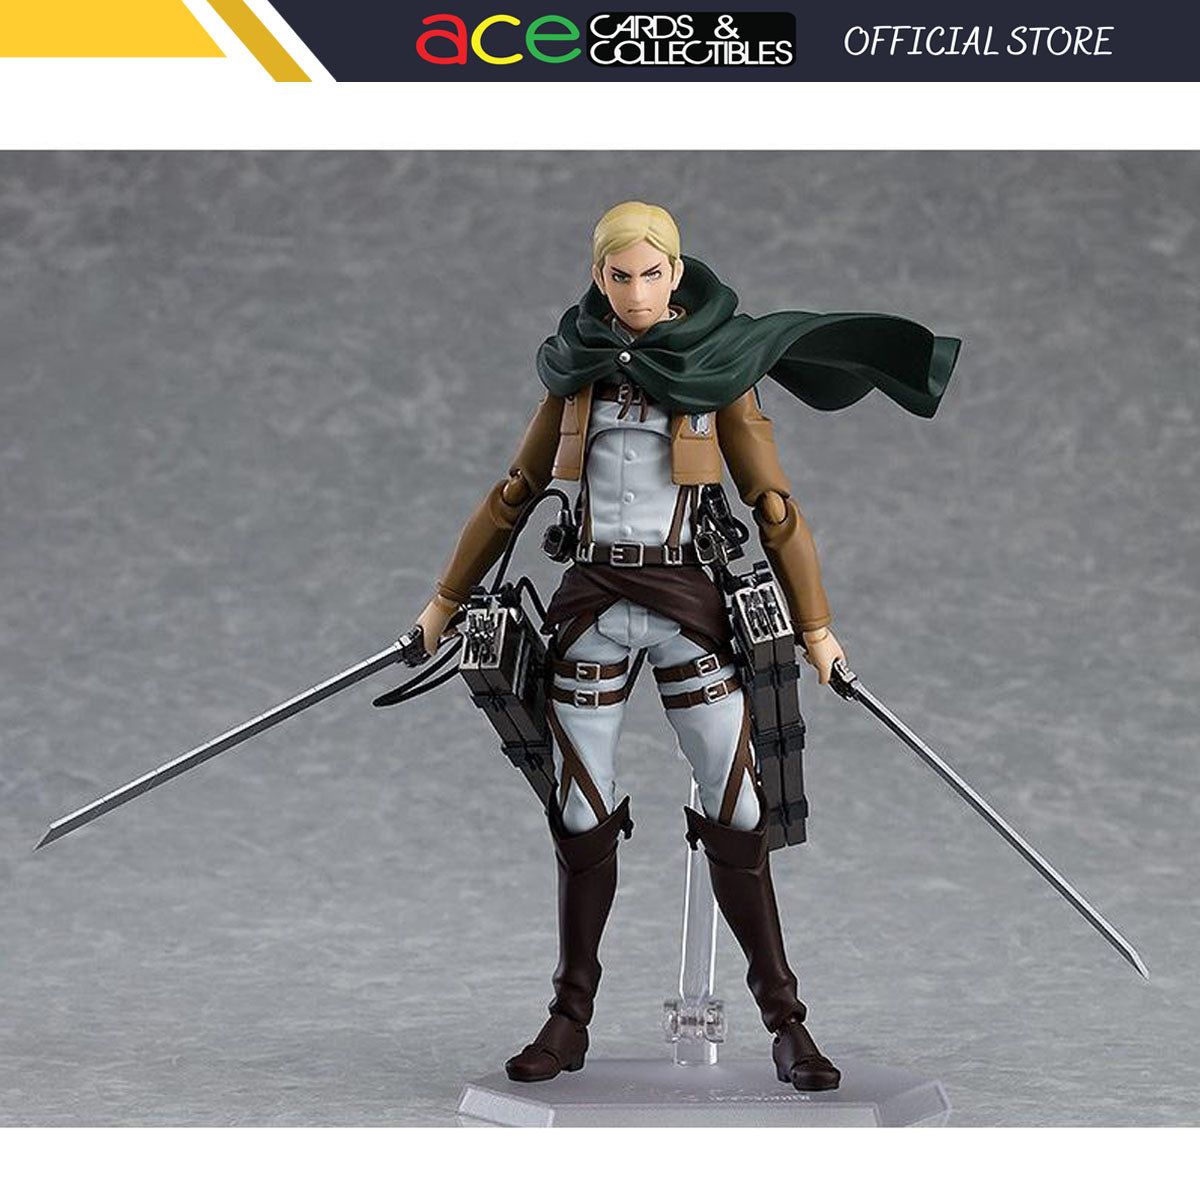 Attack on Titan Figma [446] &quot;Erwin Smith&quot; (Reissue)-Max Factory-Ace Cards &amp; Collectibles